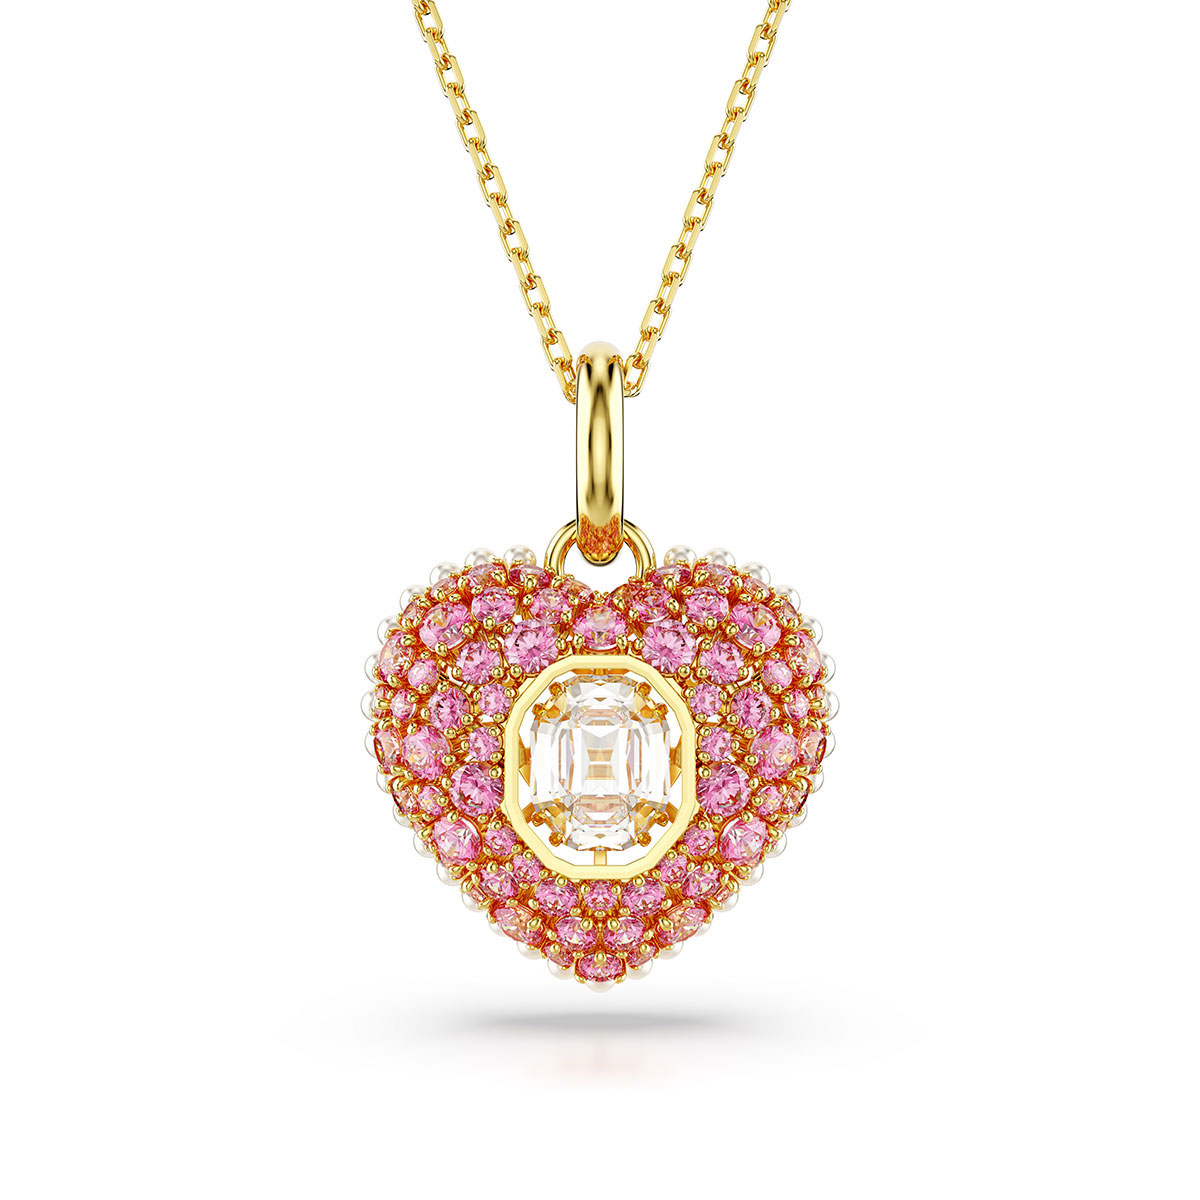 Swarovski Octagon Pink Crystal, Pearls and Gold Heart Hyperbola Pendant Necklace